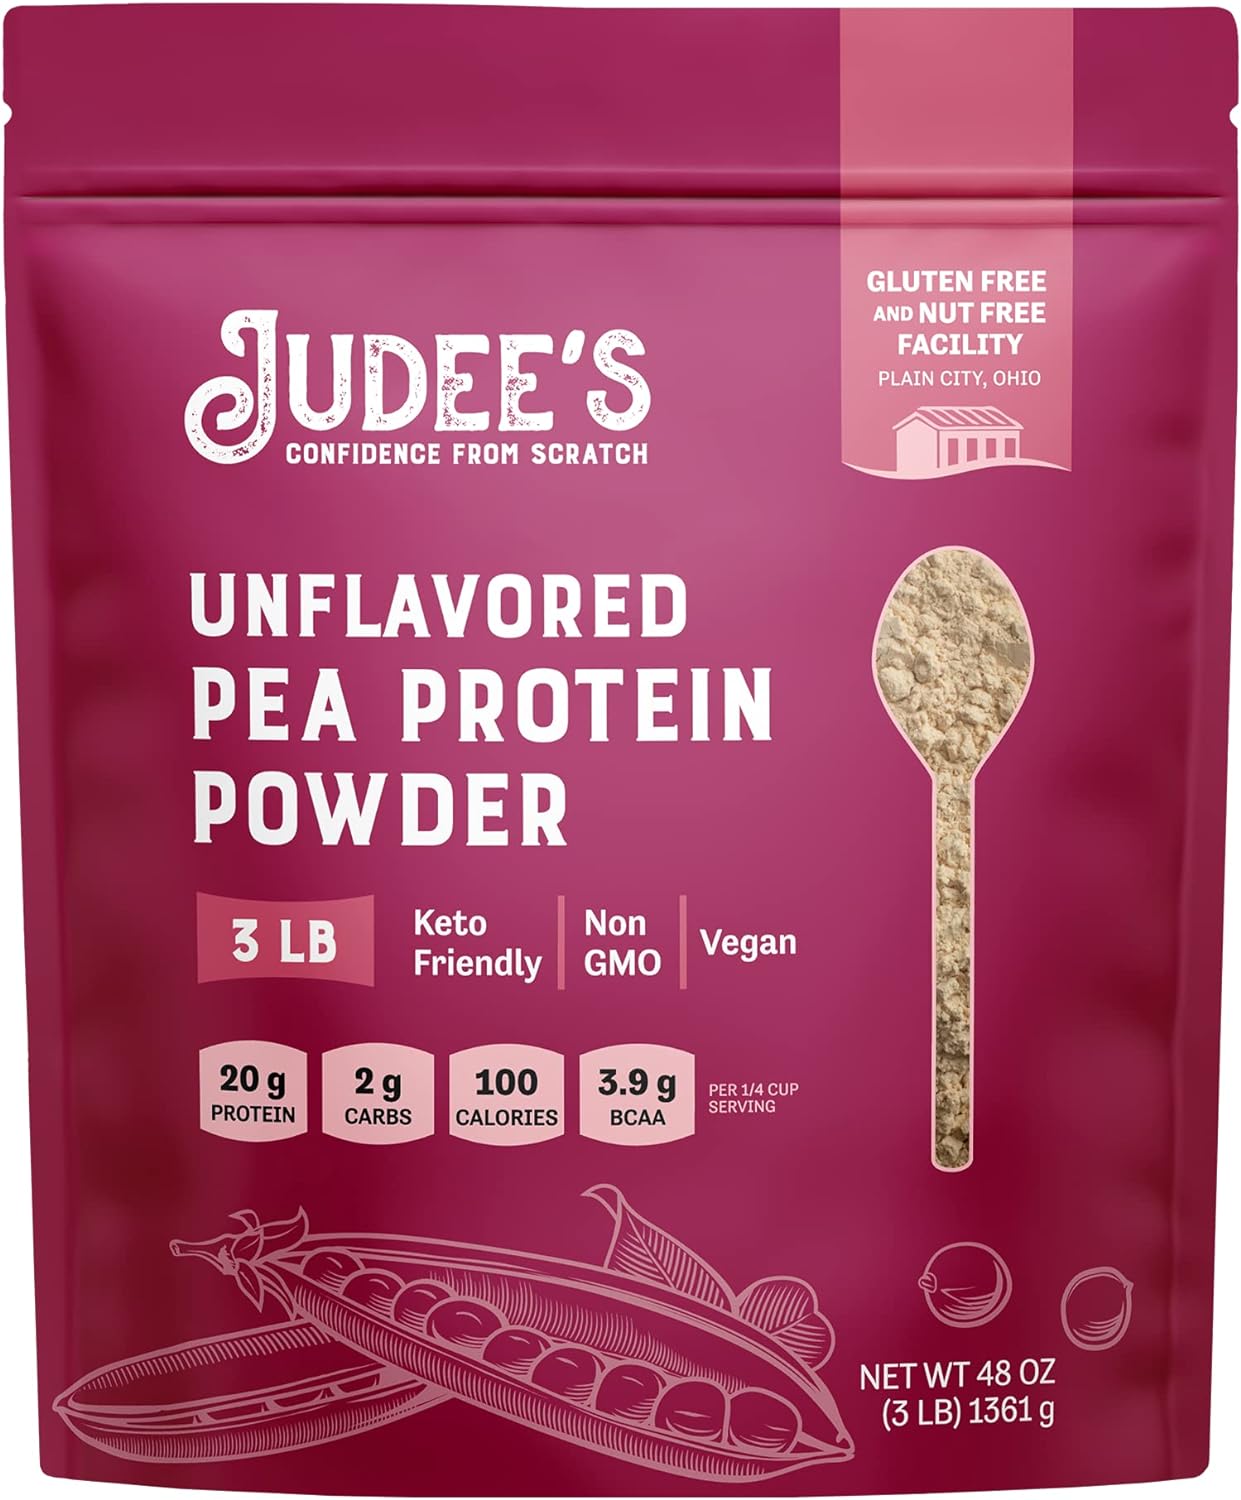 Judee?s Unflavored Pea Protein Powder (80% Protein) 3 lb - 100% Non-GMO, Keto-Friendly, Vegan - Dairy-Free, Soy-Free, Gluten-Free and Nut-Free - Easily Dissolve in Liquids